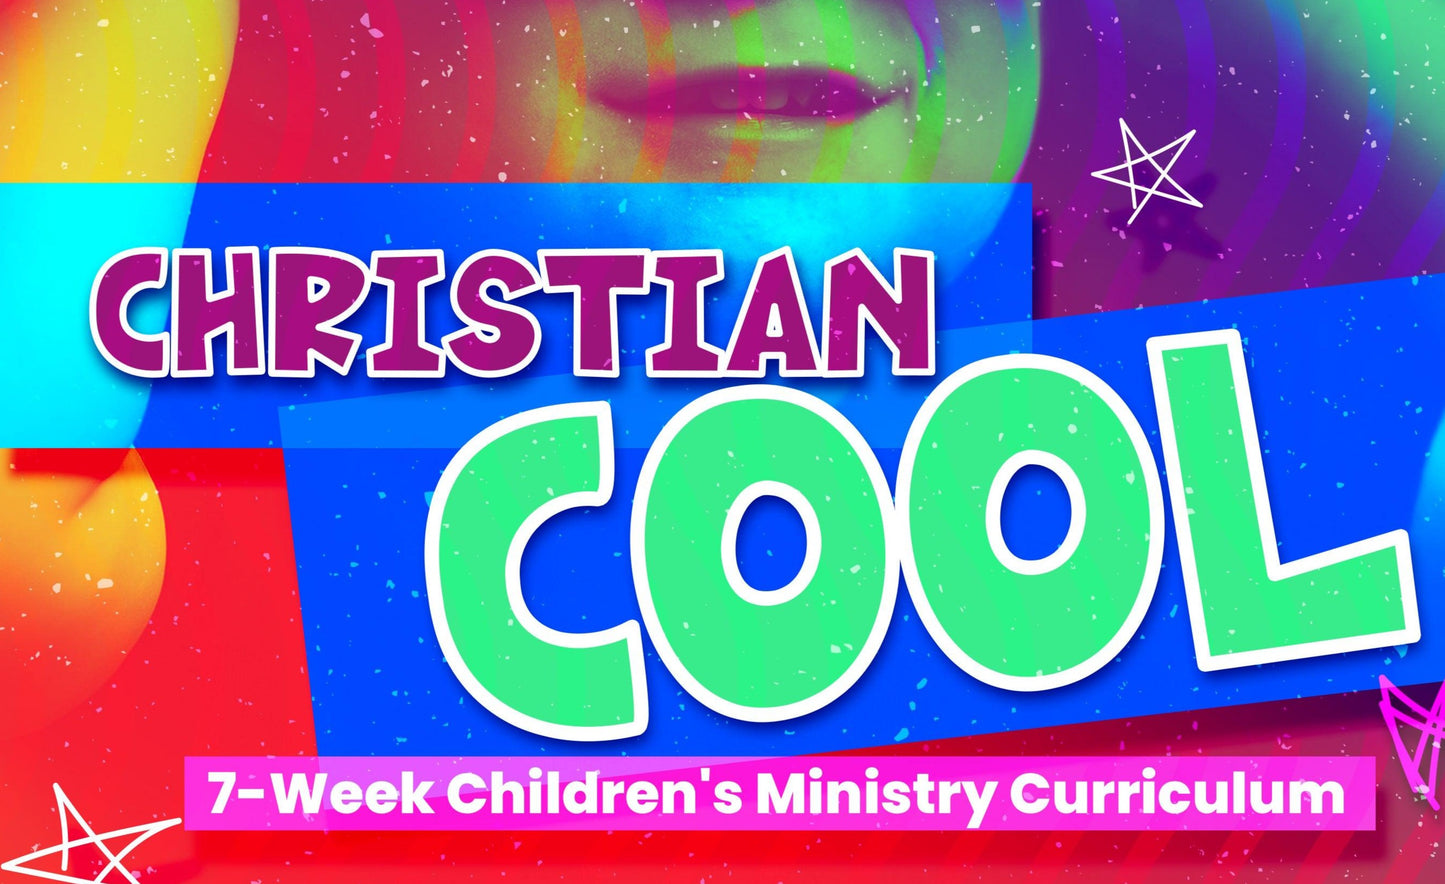 Christian Cool: 7-Week Children's Ministry Curriculum (download only) - Sunday School Store 